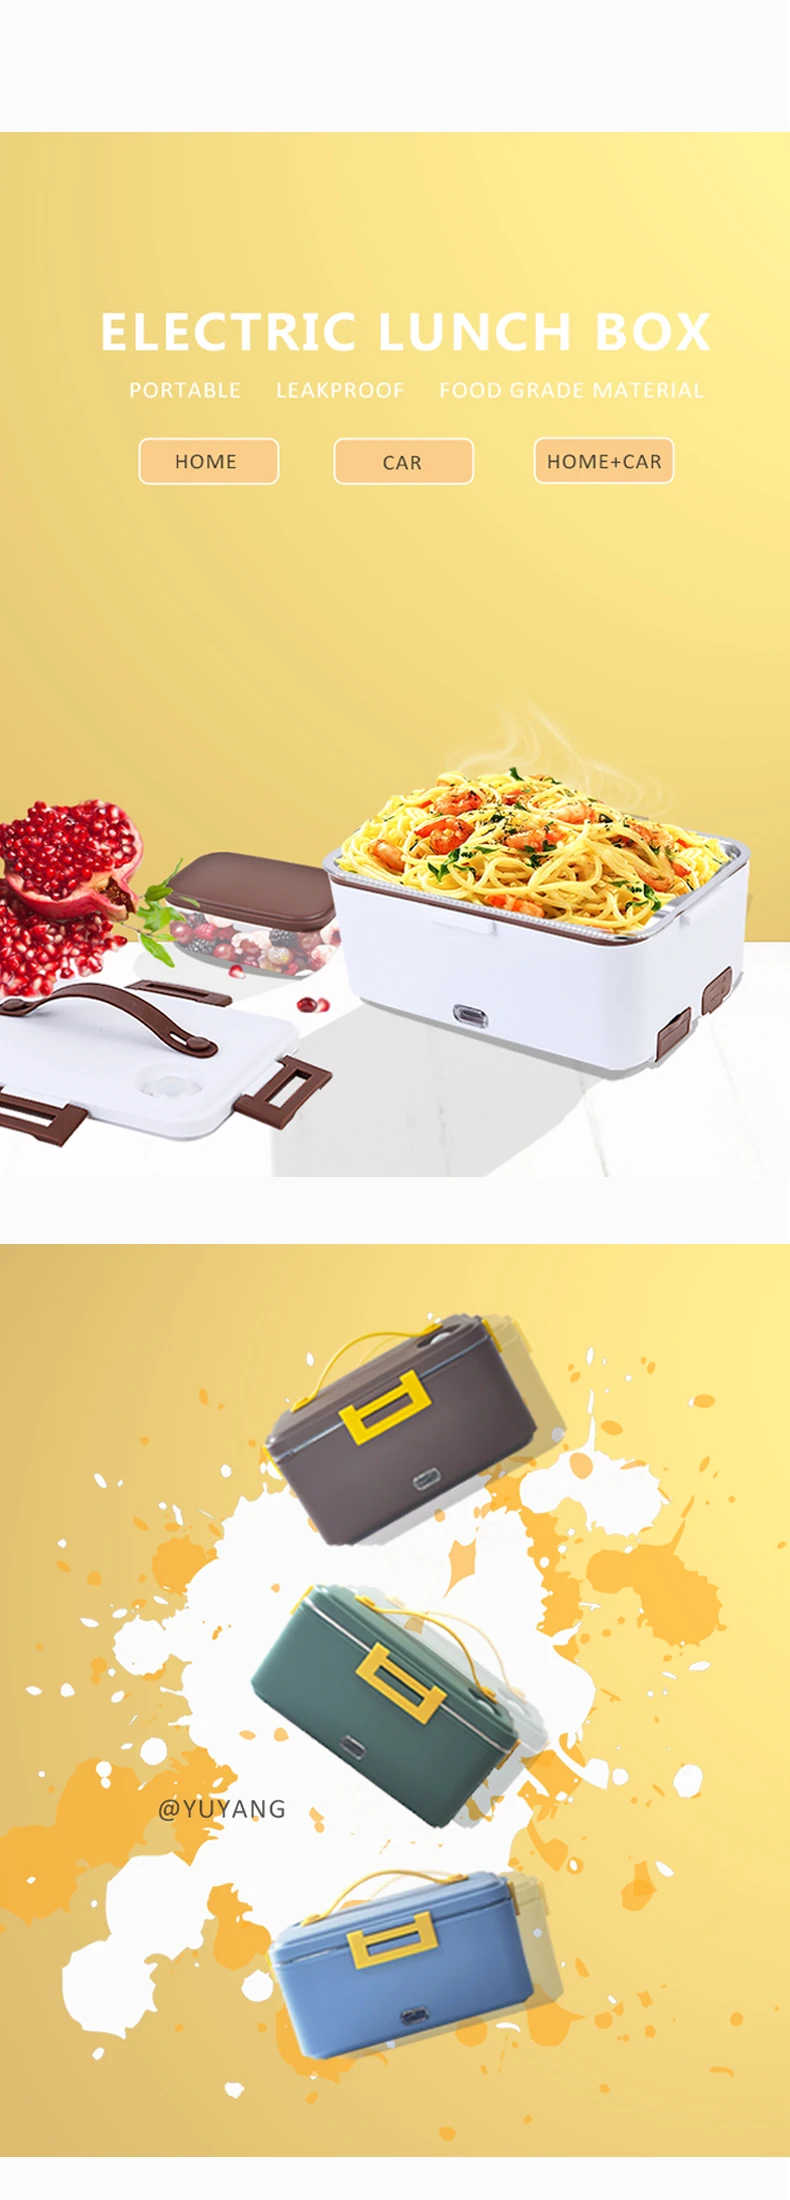 2022 New 80W 110V Electric Lunch Box Portable Heated Food Warmer 1.8L Large Capacity For Car/Truck/Home Use